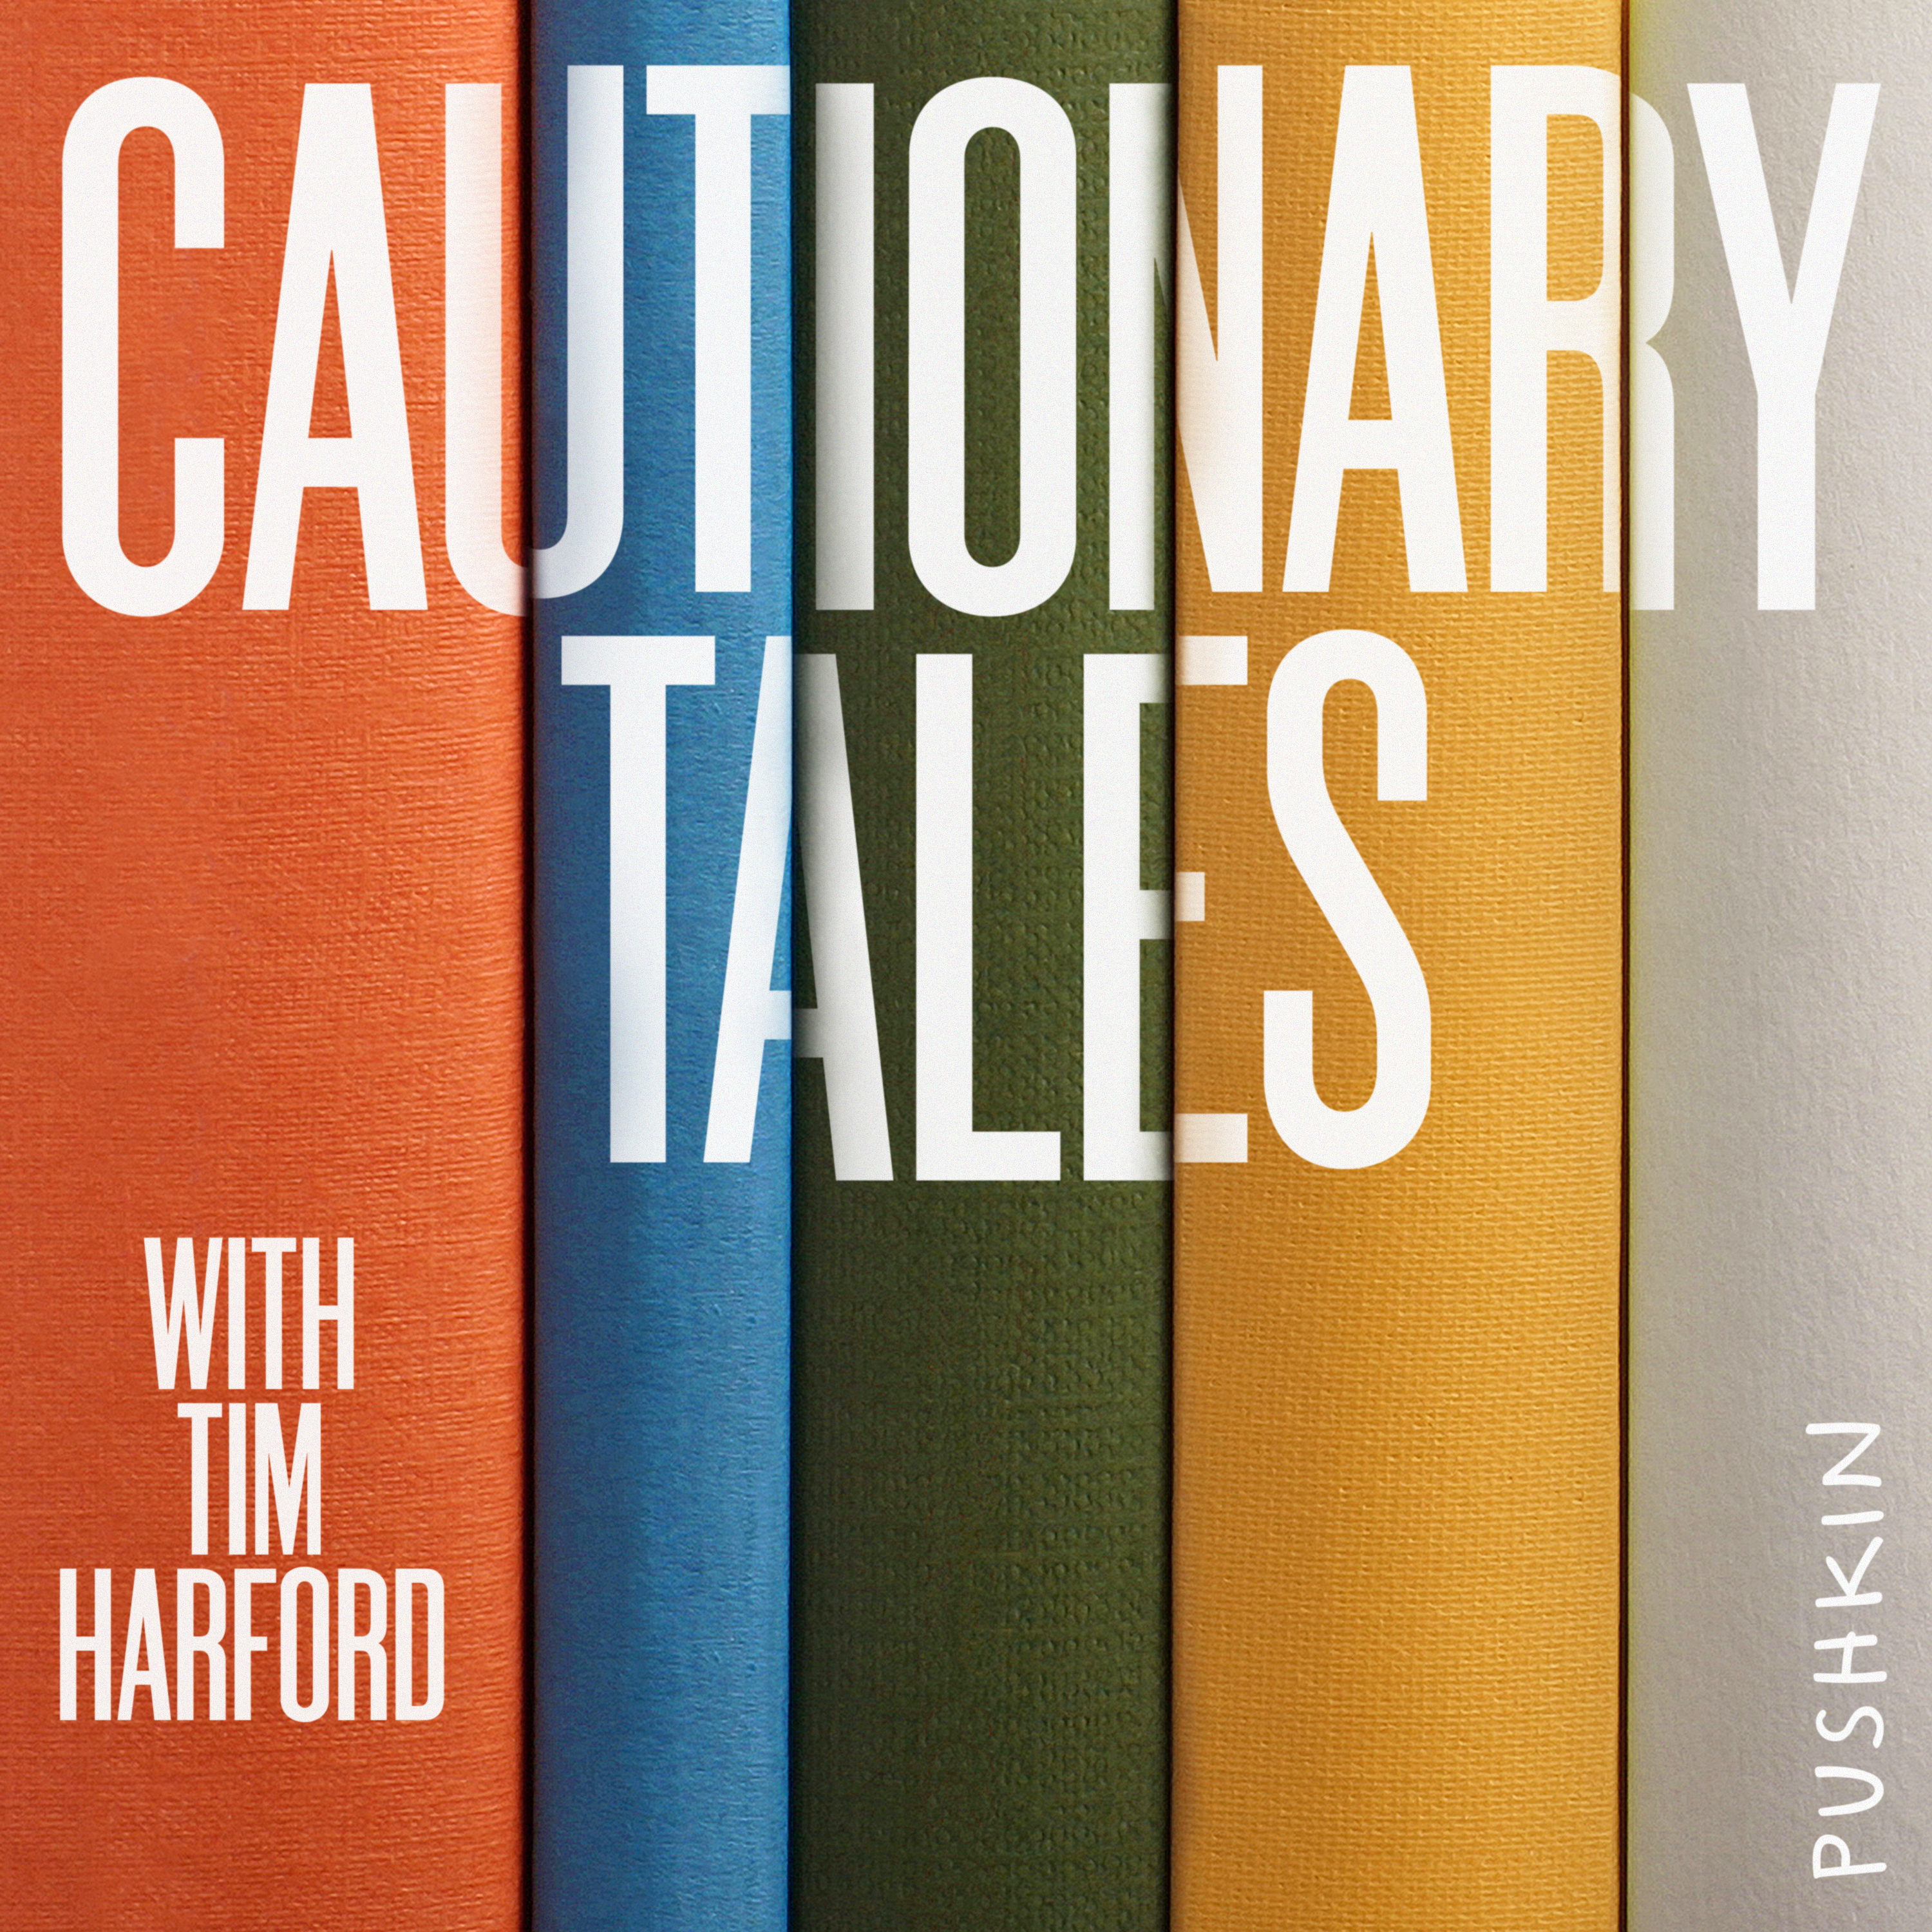 Cautionary Tales with Tim Harford podcast show image